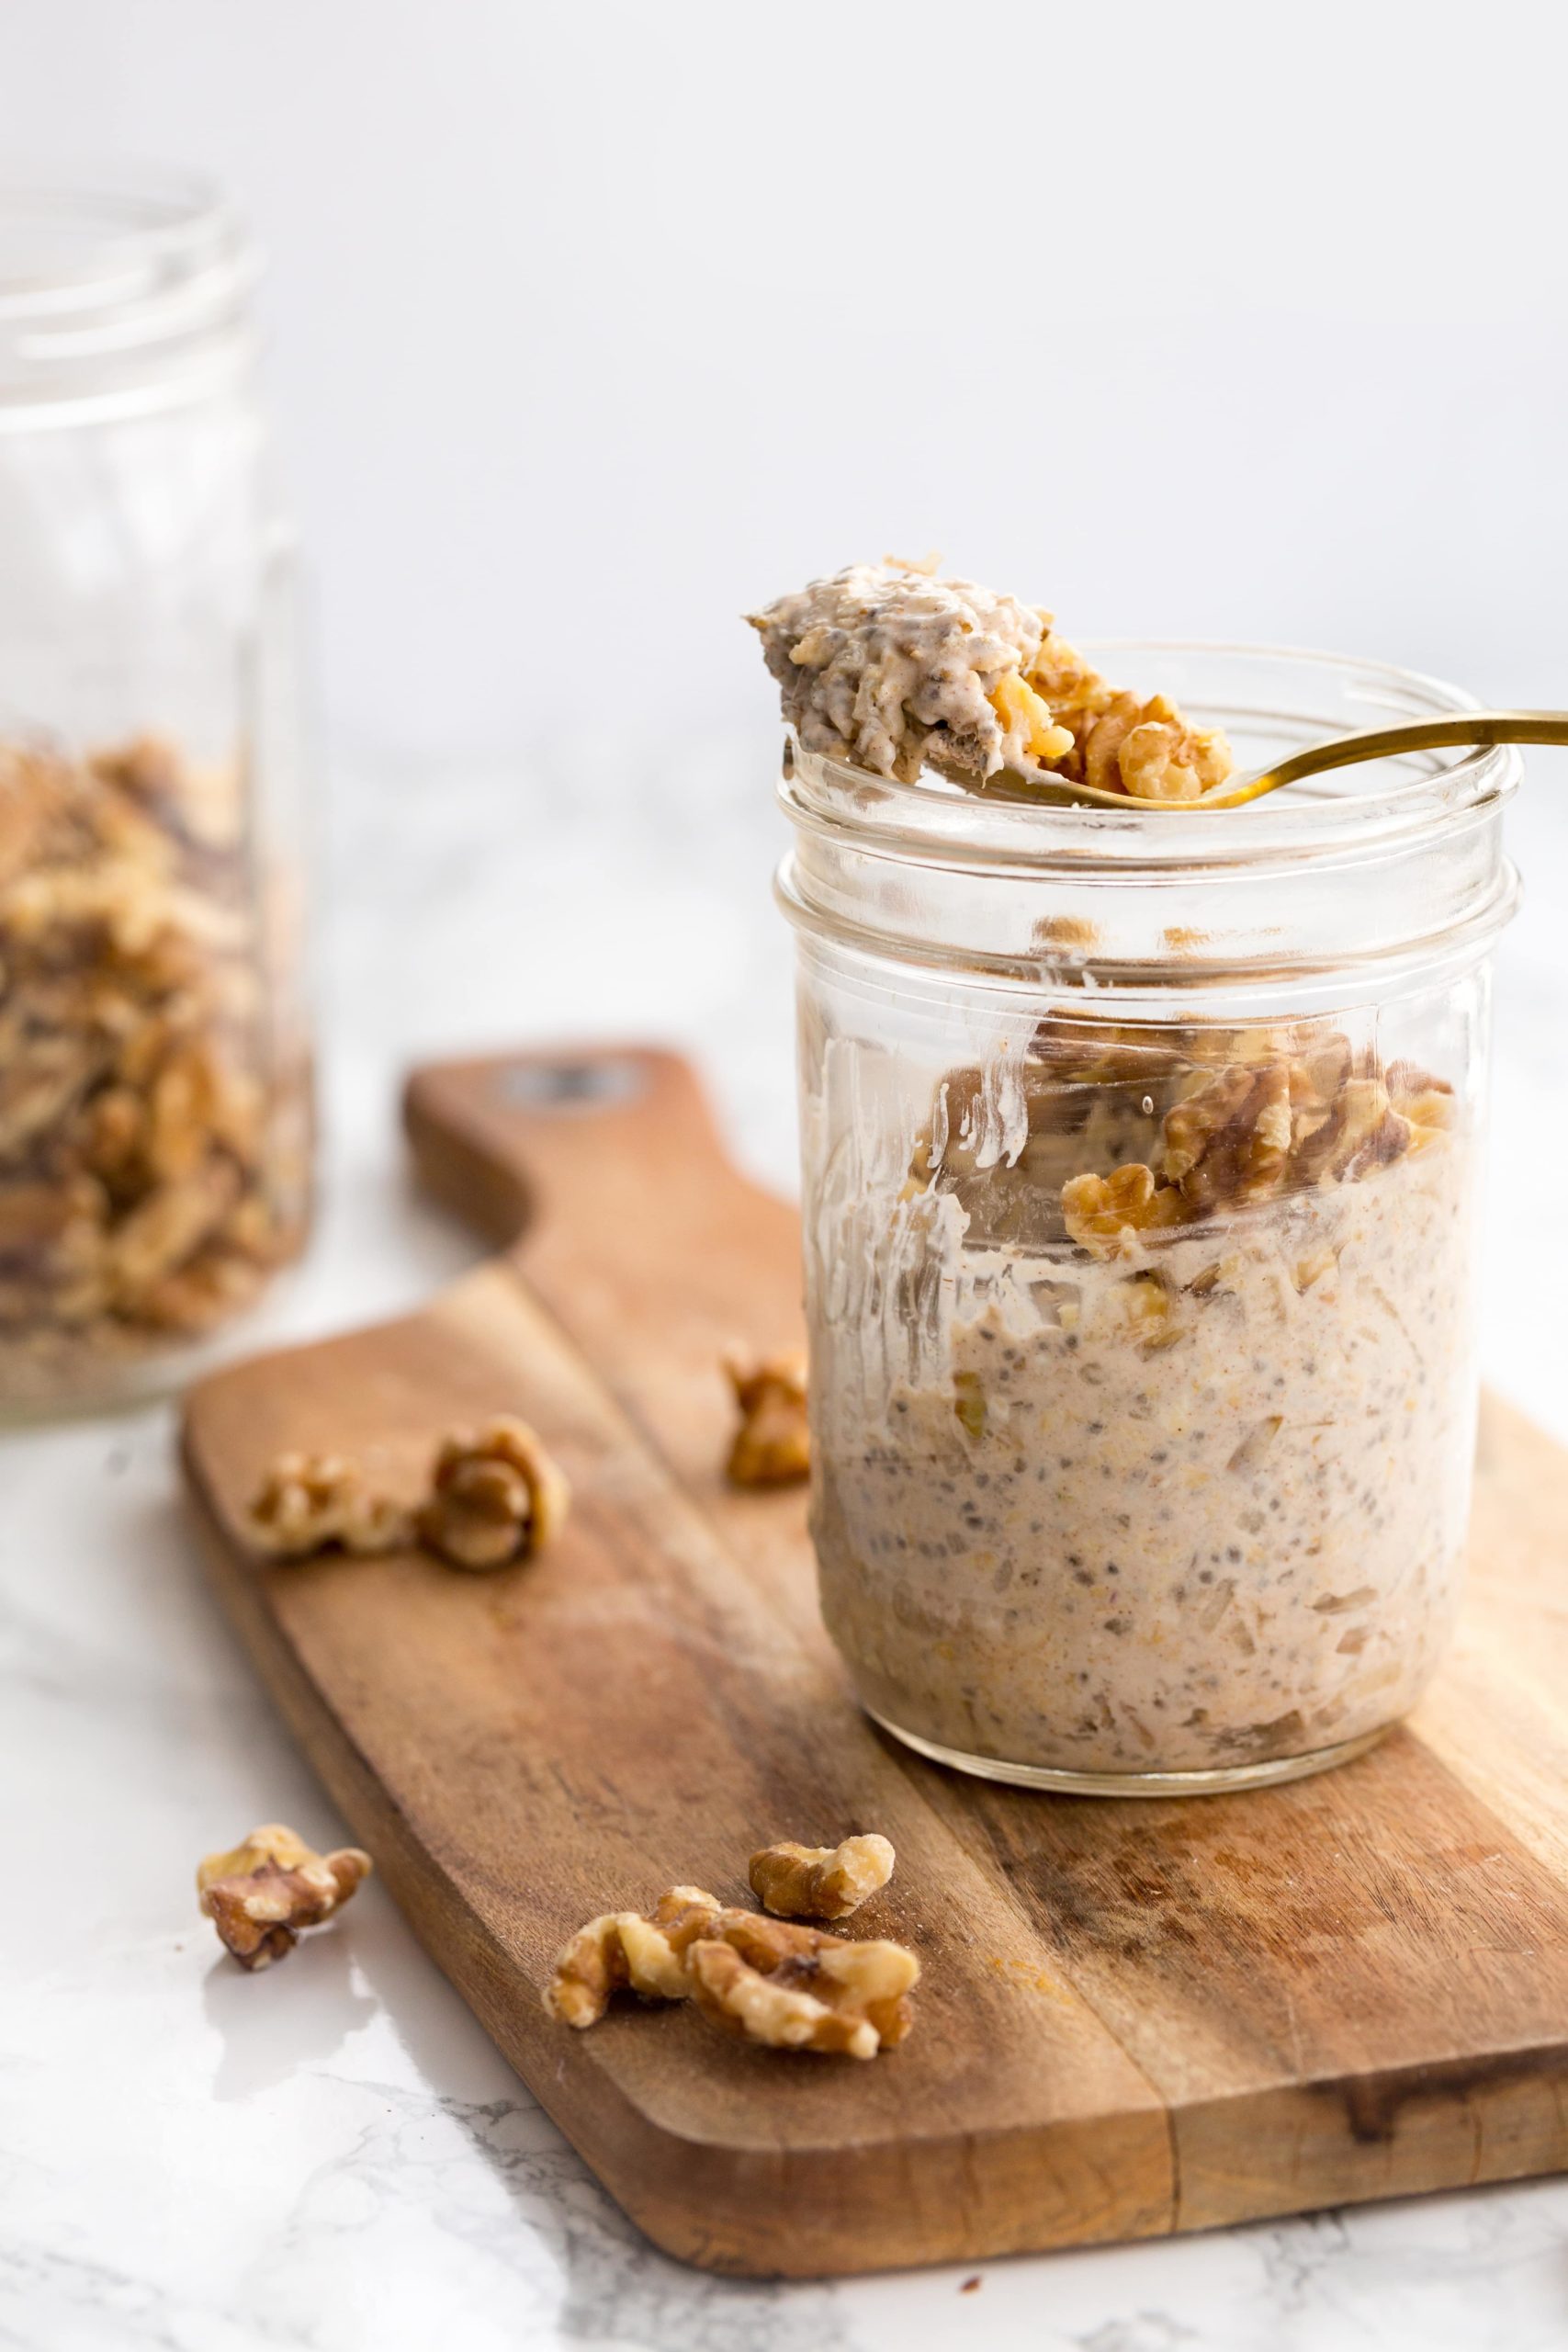 https://inspiralized.com/wp-content/uploads/2019/02/Spiced-Pear-Overnight-Oats-5-scaled.jpg